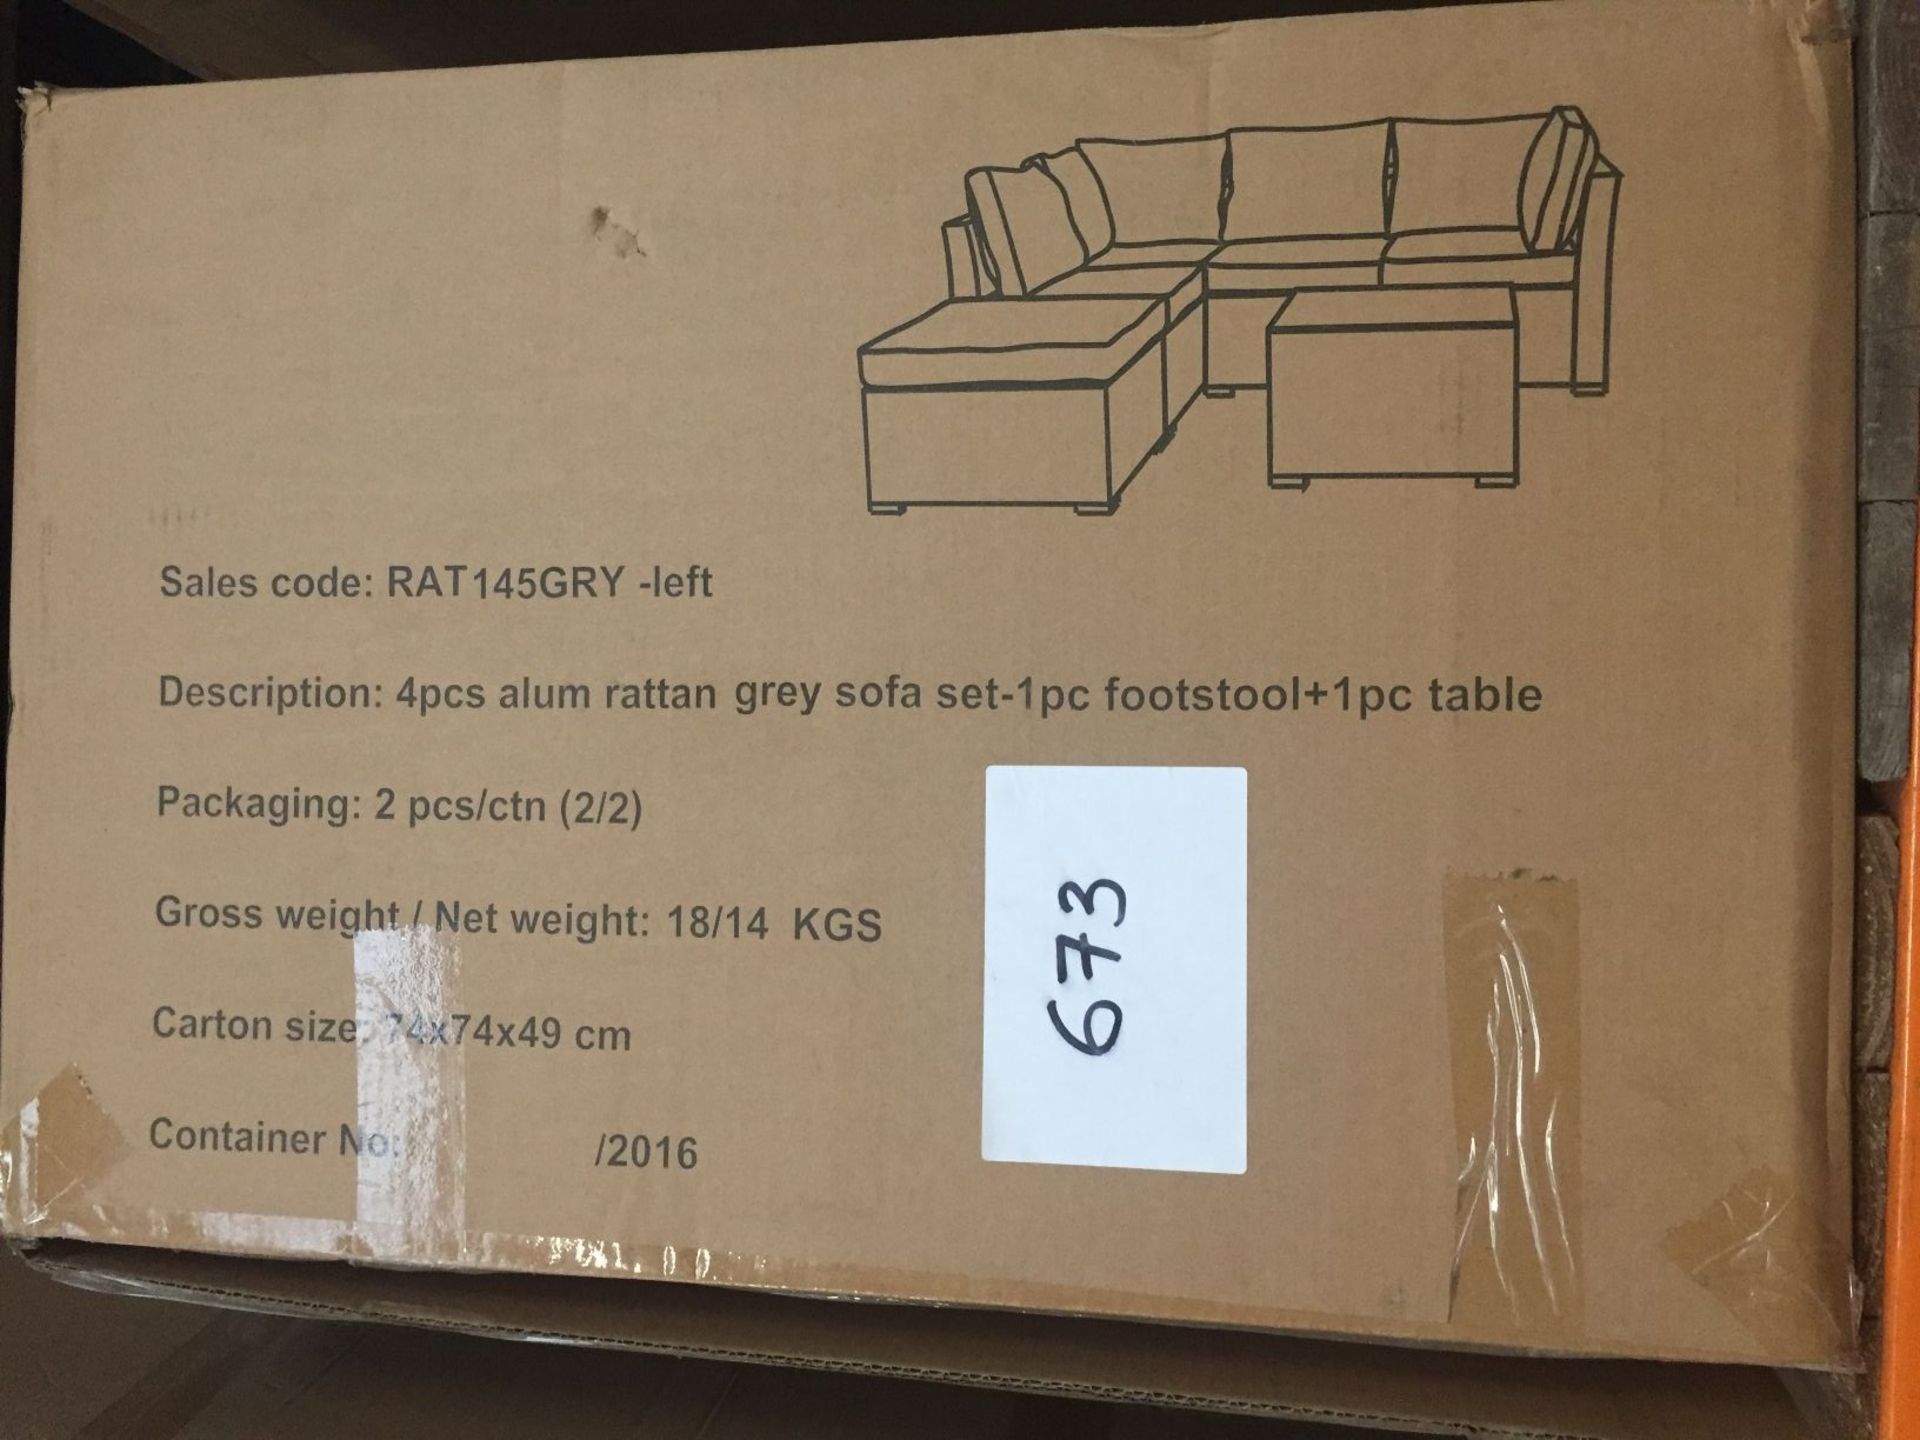 1 LOT TO CONTAIN ALUMINIUM GREY RATTAN SOFA SET (CONTAINS 1 TABLE WITH GLASS & 1 FOOTSTOOL ) - BOXED